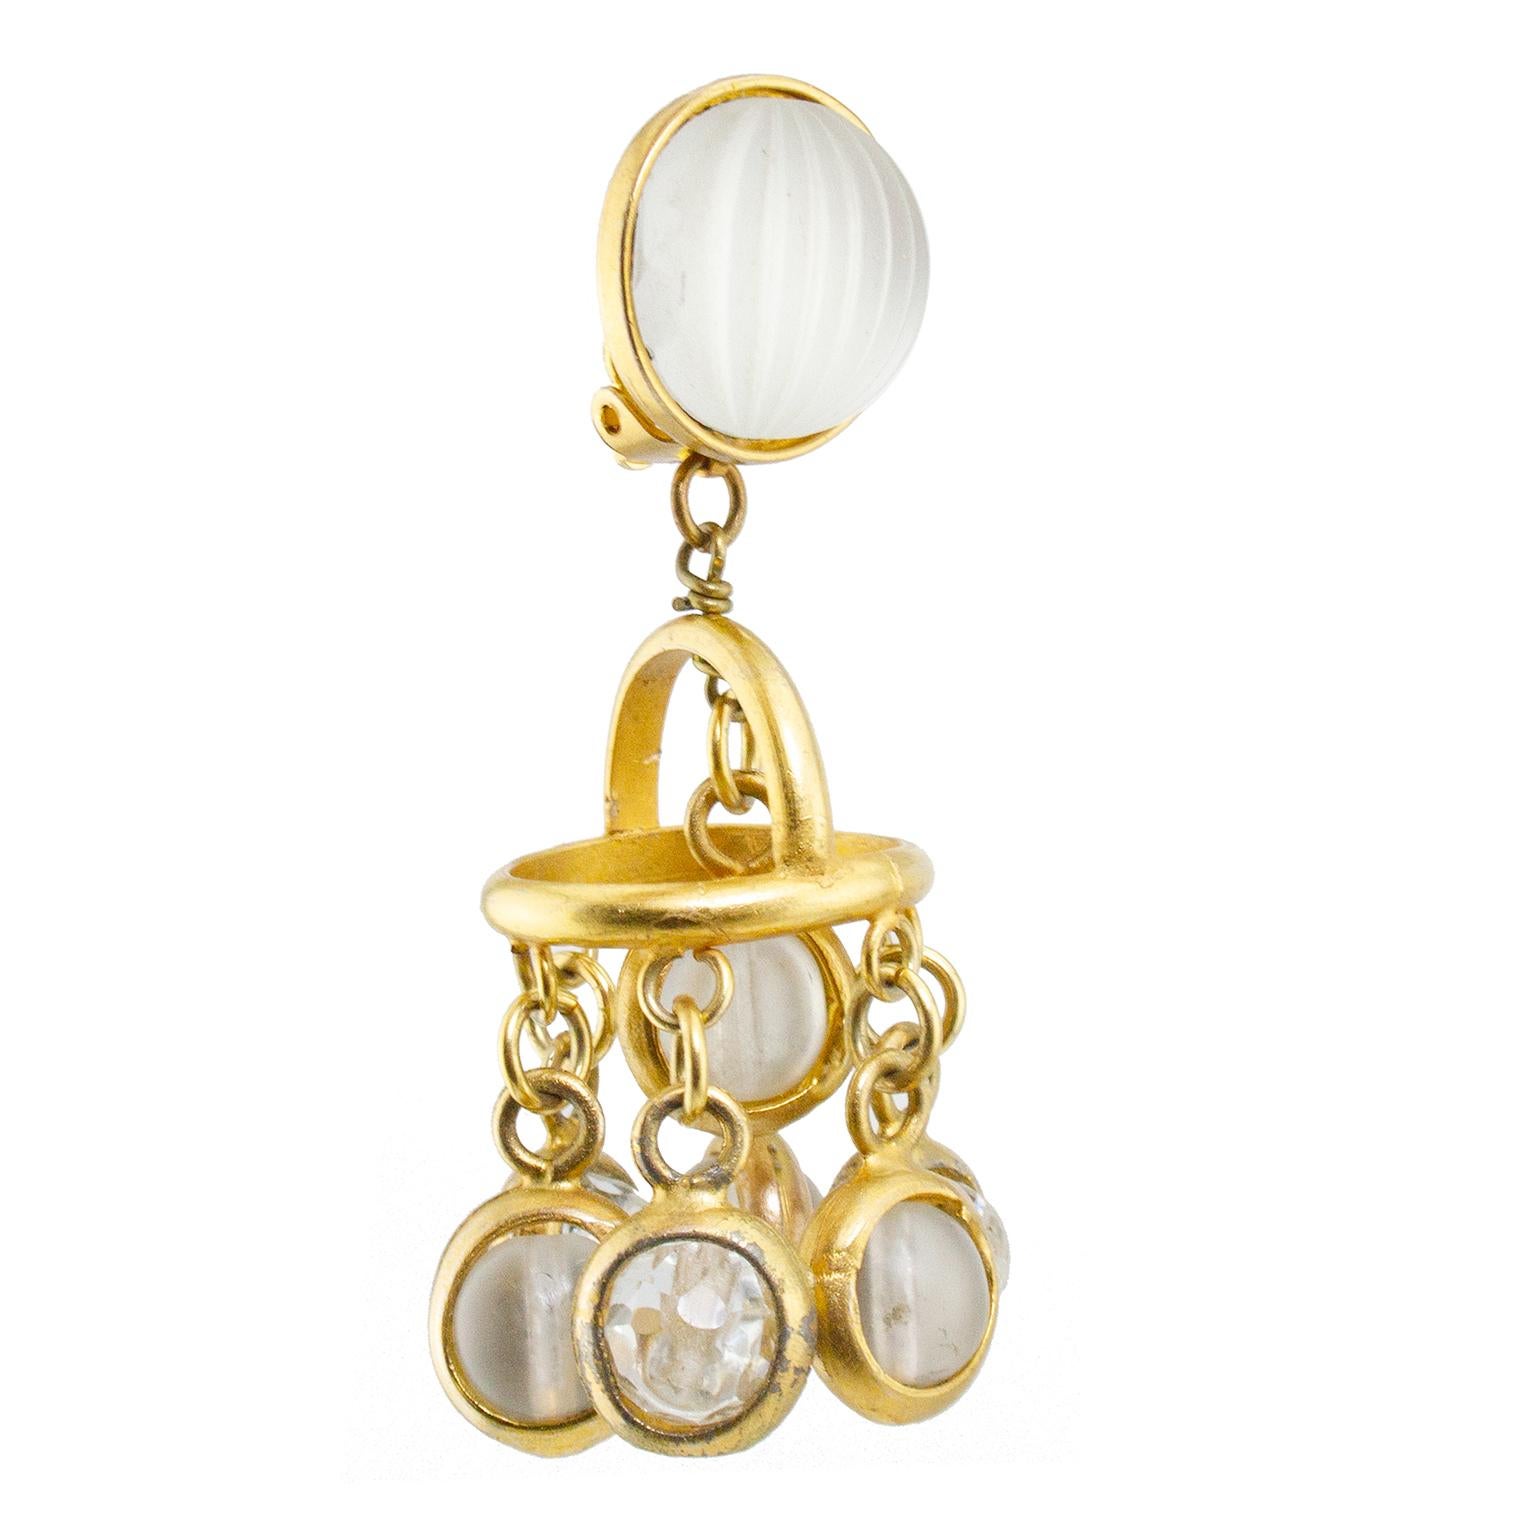 Rare 1970's Paco Rabanne clip on earrings. Gold tone metal with ribbed frosted glass button at top. The earrings drop down into a mobile-like pendant featuring dropped small chain links with clear crystal and pearl sphere stones. Back features clips